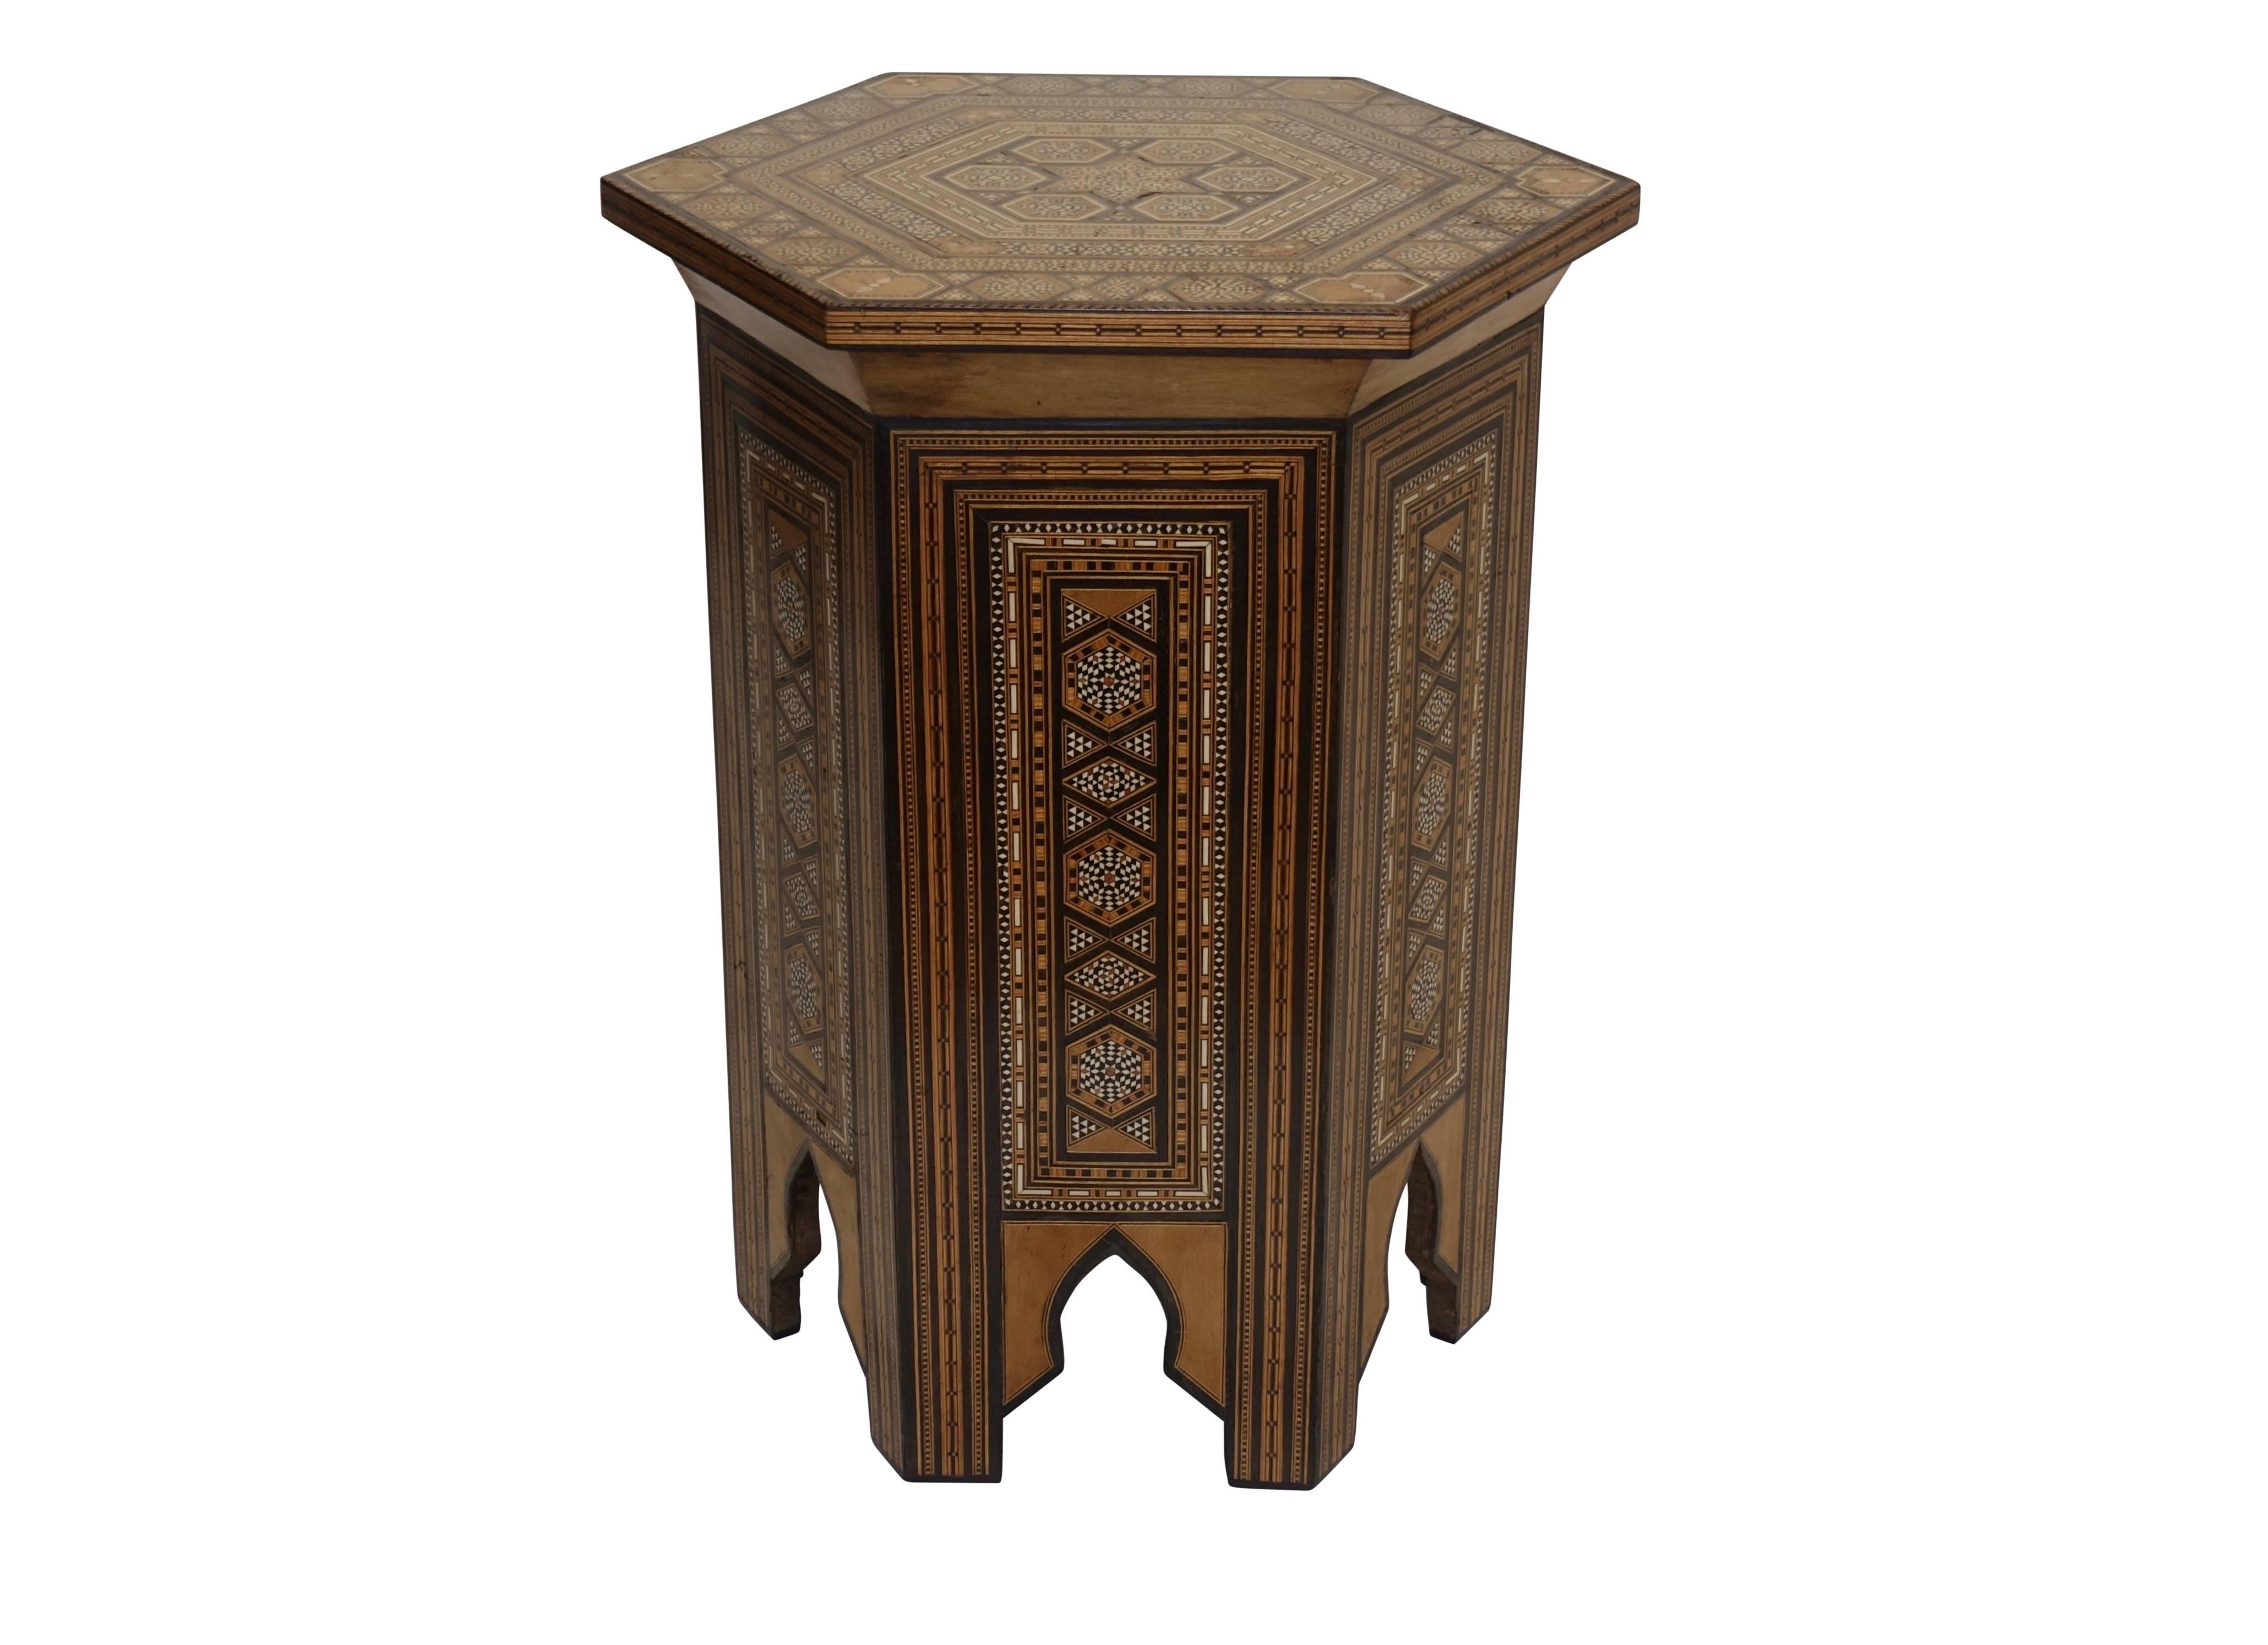 Hexagonal shape tabouret side table with multi wood inlay, along with bone and mother of pearl, all in geometric design. Syrian or Middle eastern, early 20th century.